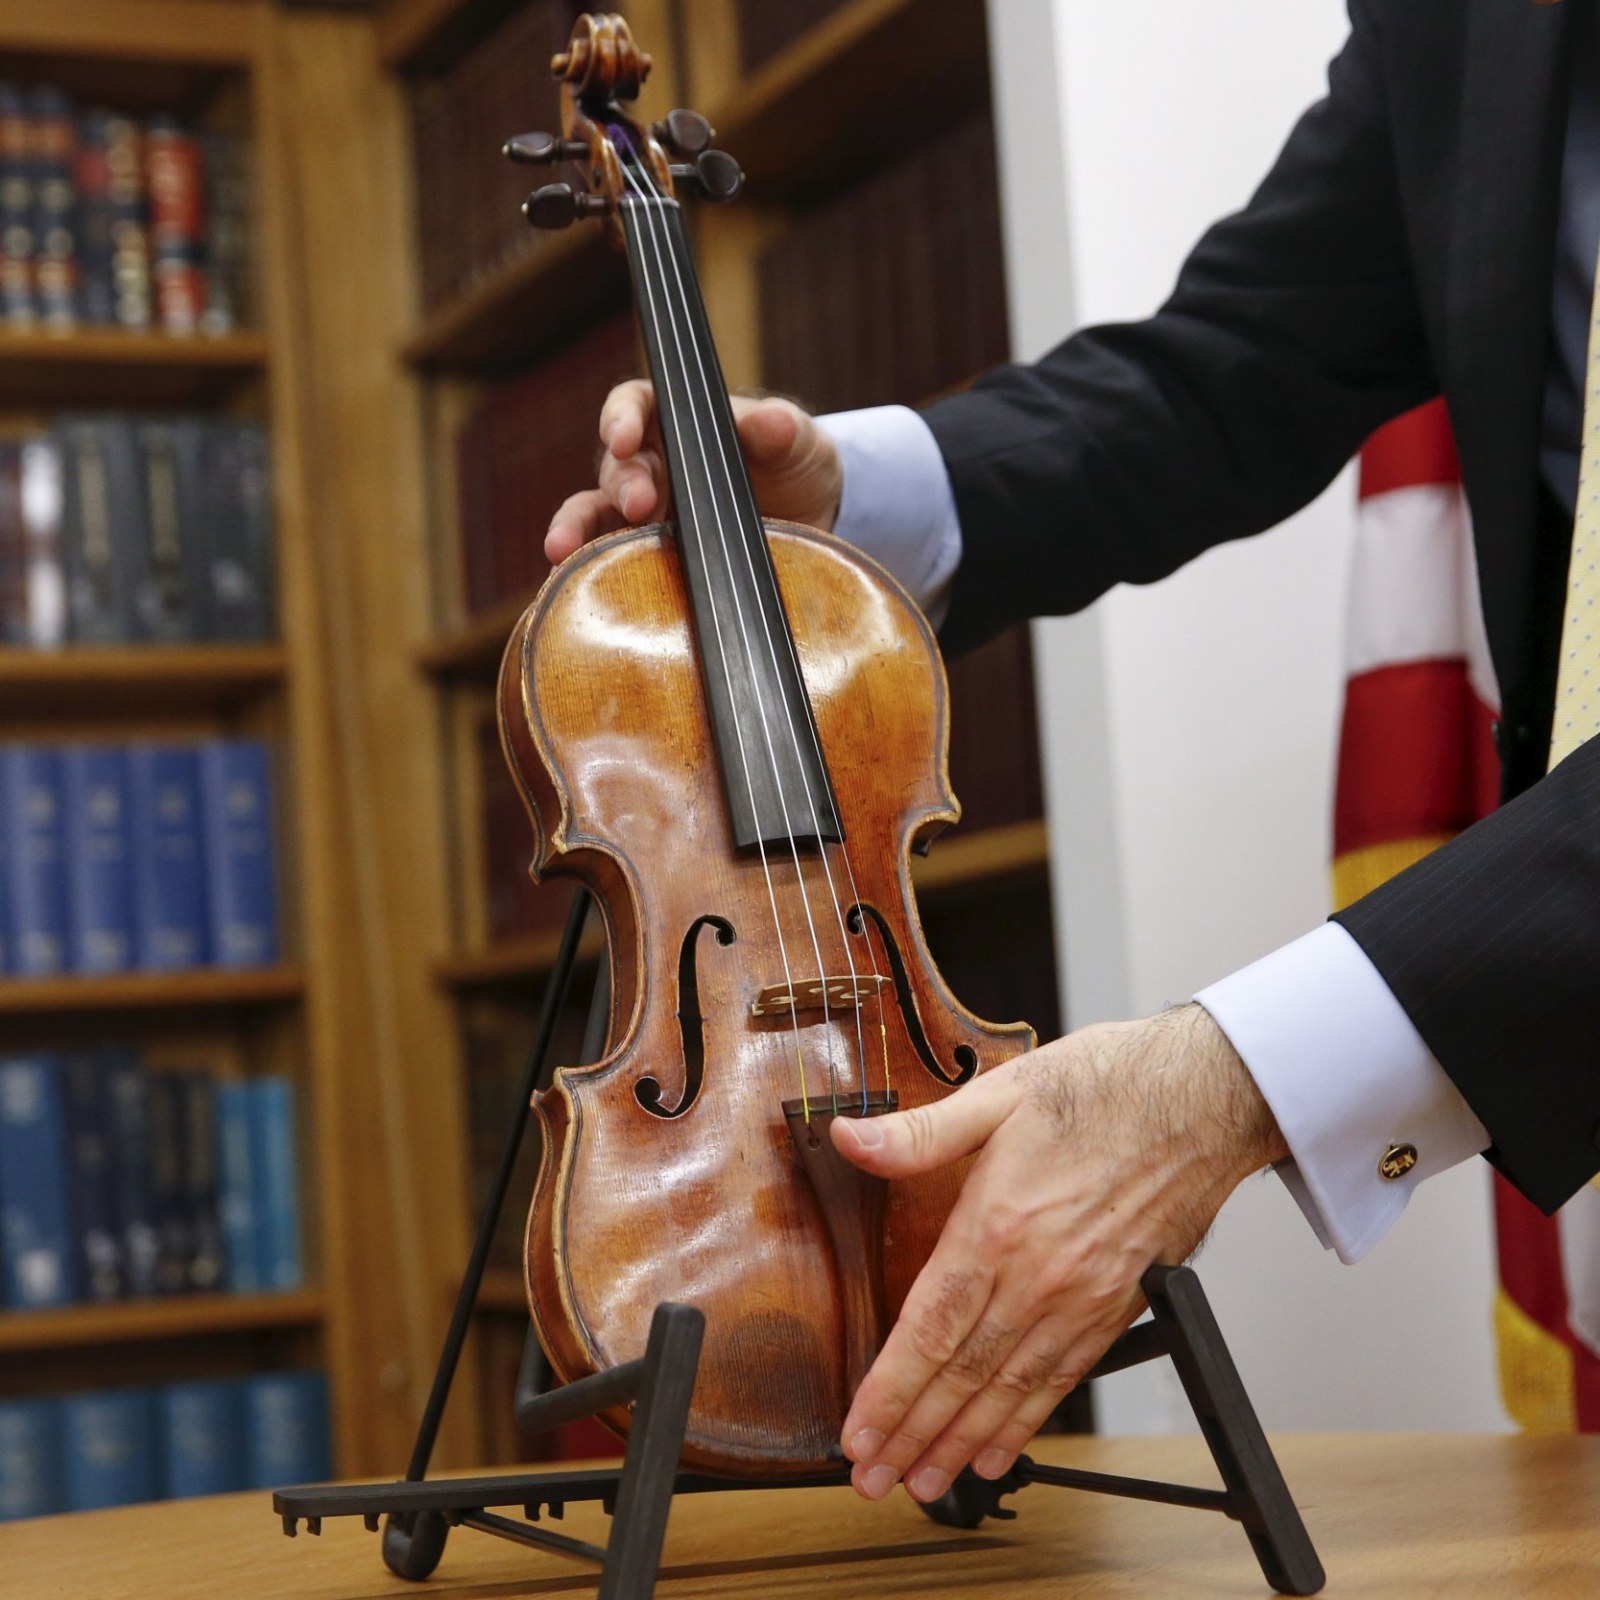 For Stradivarius Violin Discovered, There Many Wannabes, Fakes